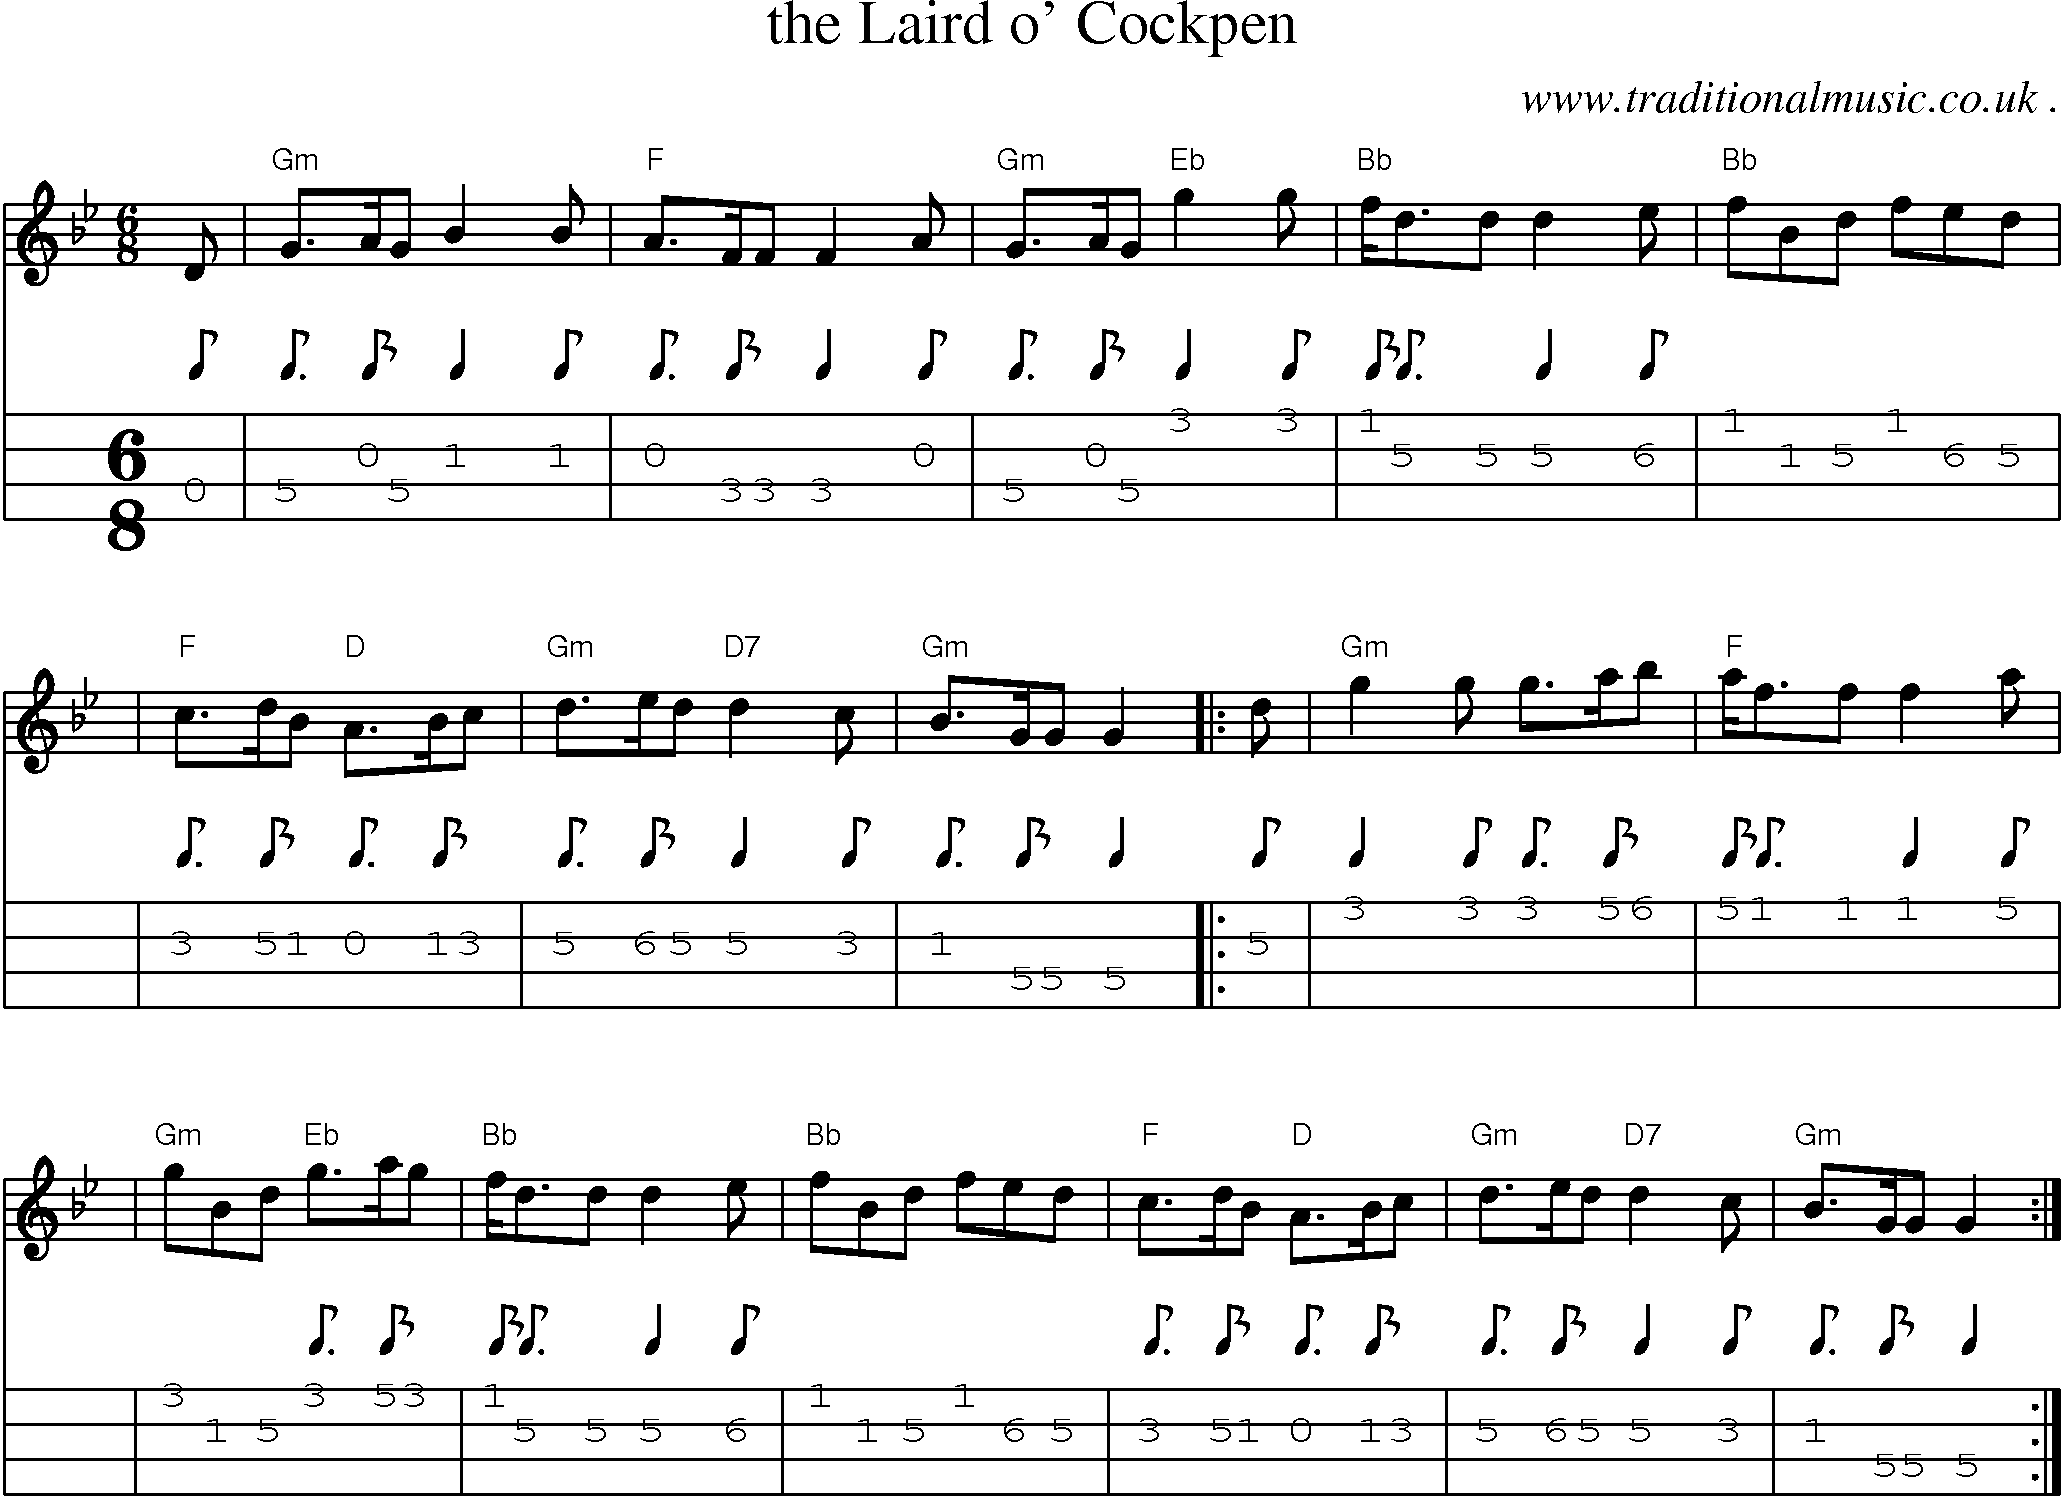 Sheet-music  score, Chords and Mandolin Tabs for The Laird O Cockpen